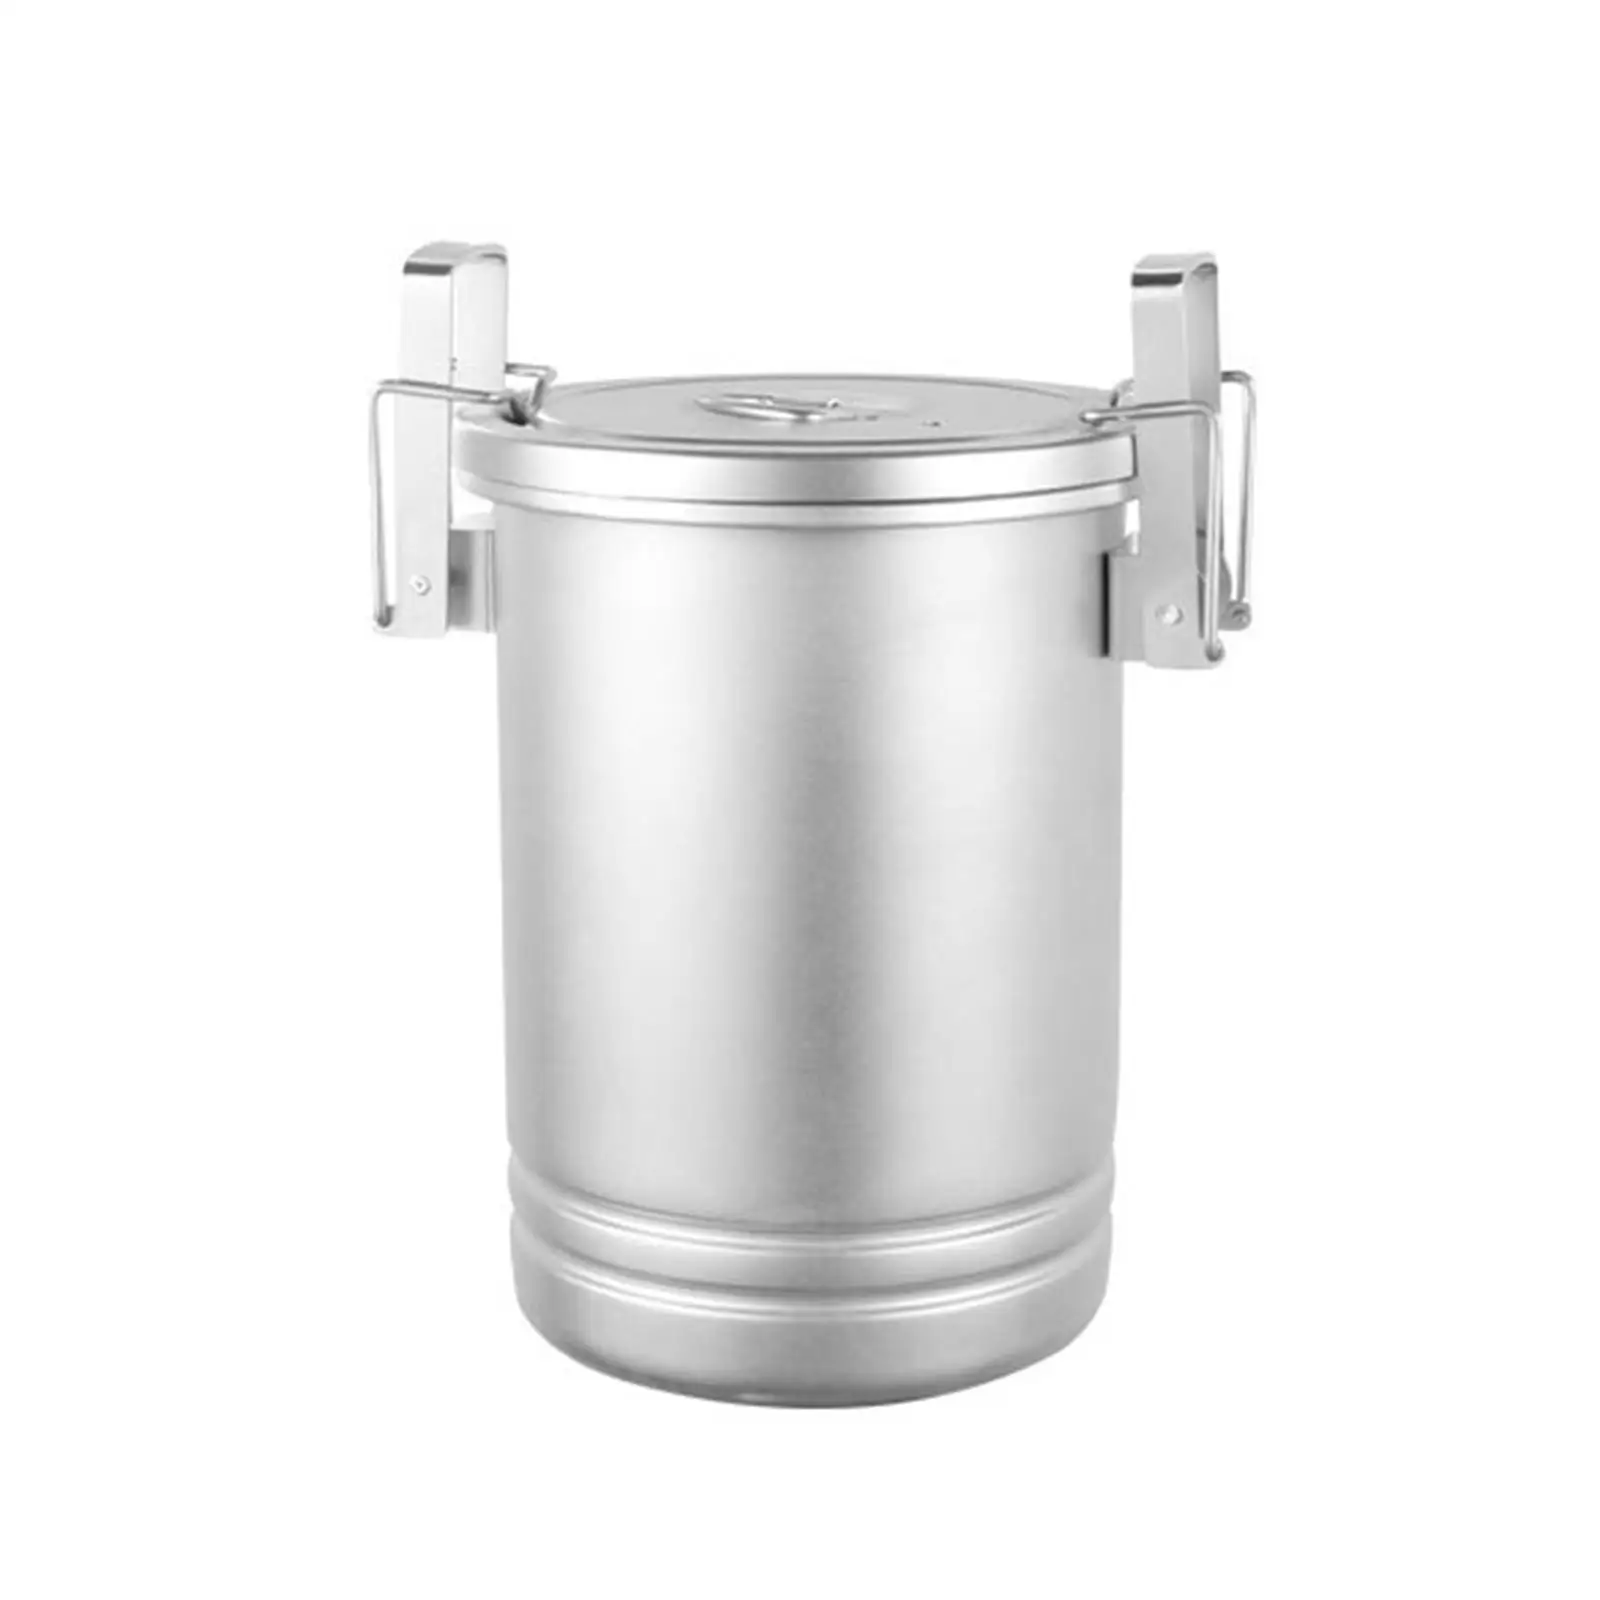 Cooking Pot Accessories Cooking with Lid Pot for Hiking Fishing Travel